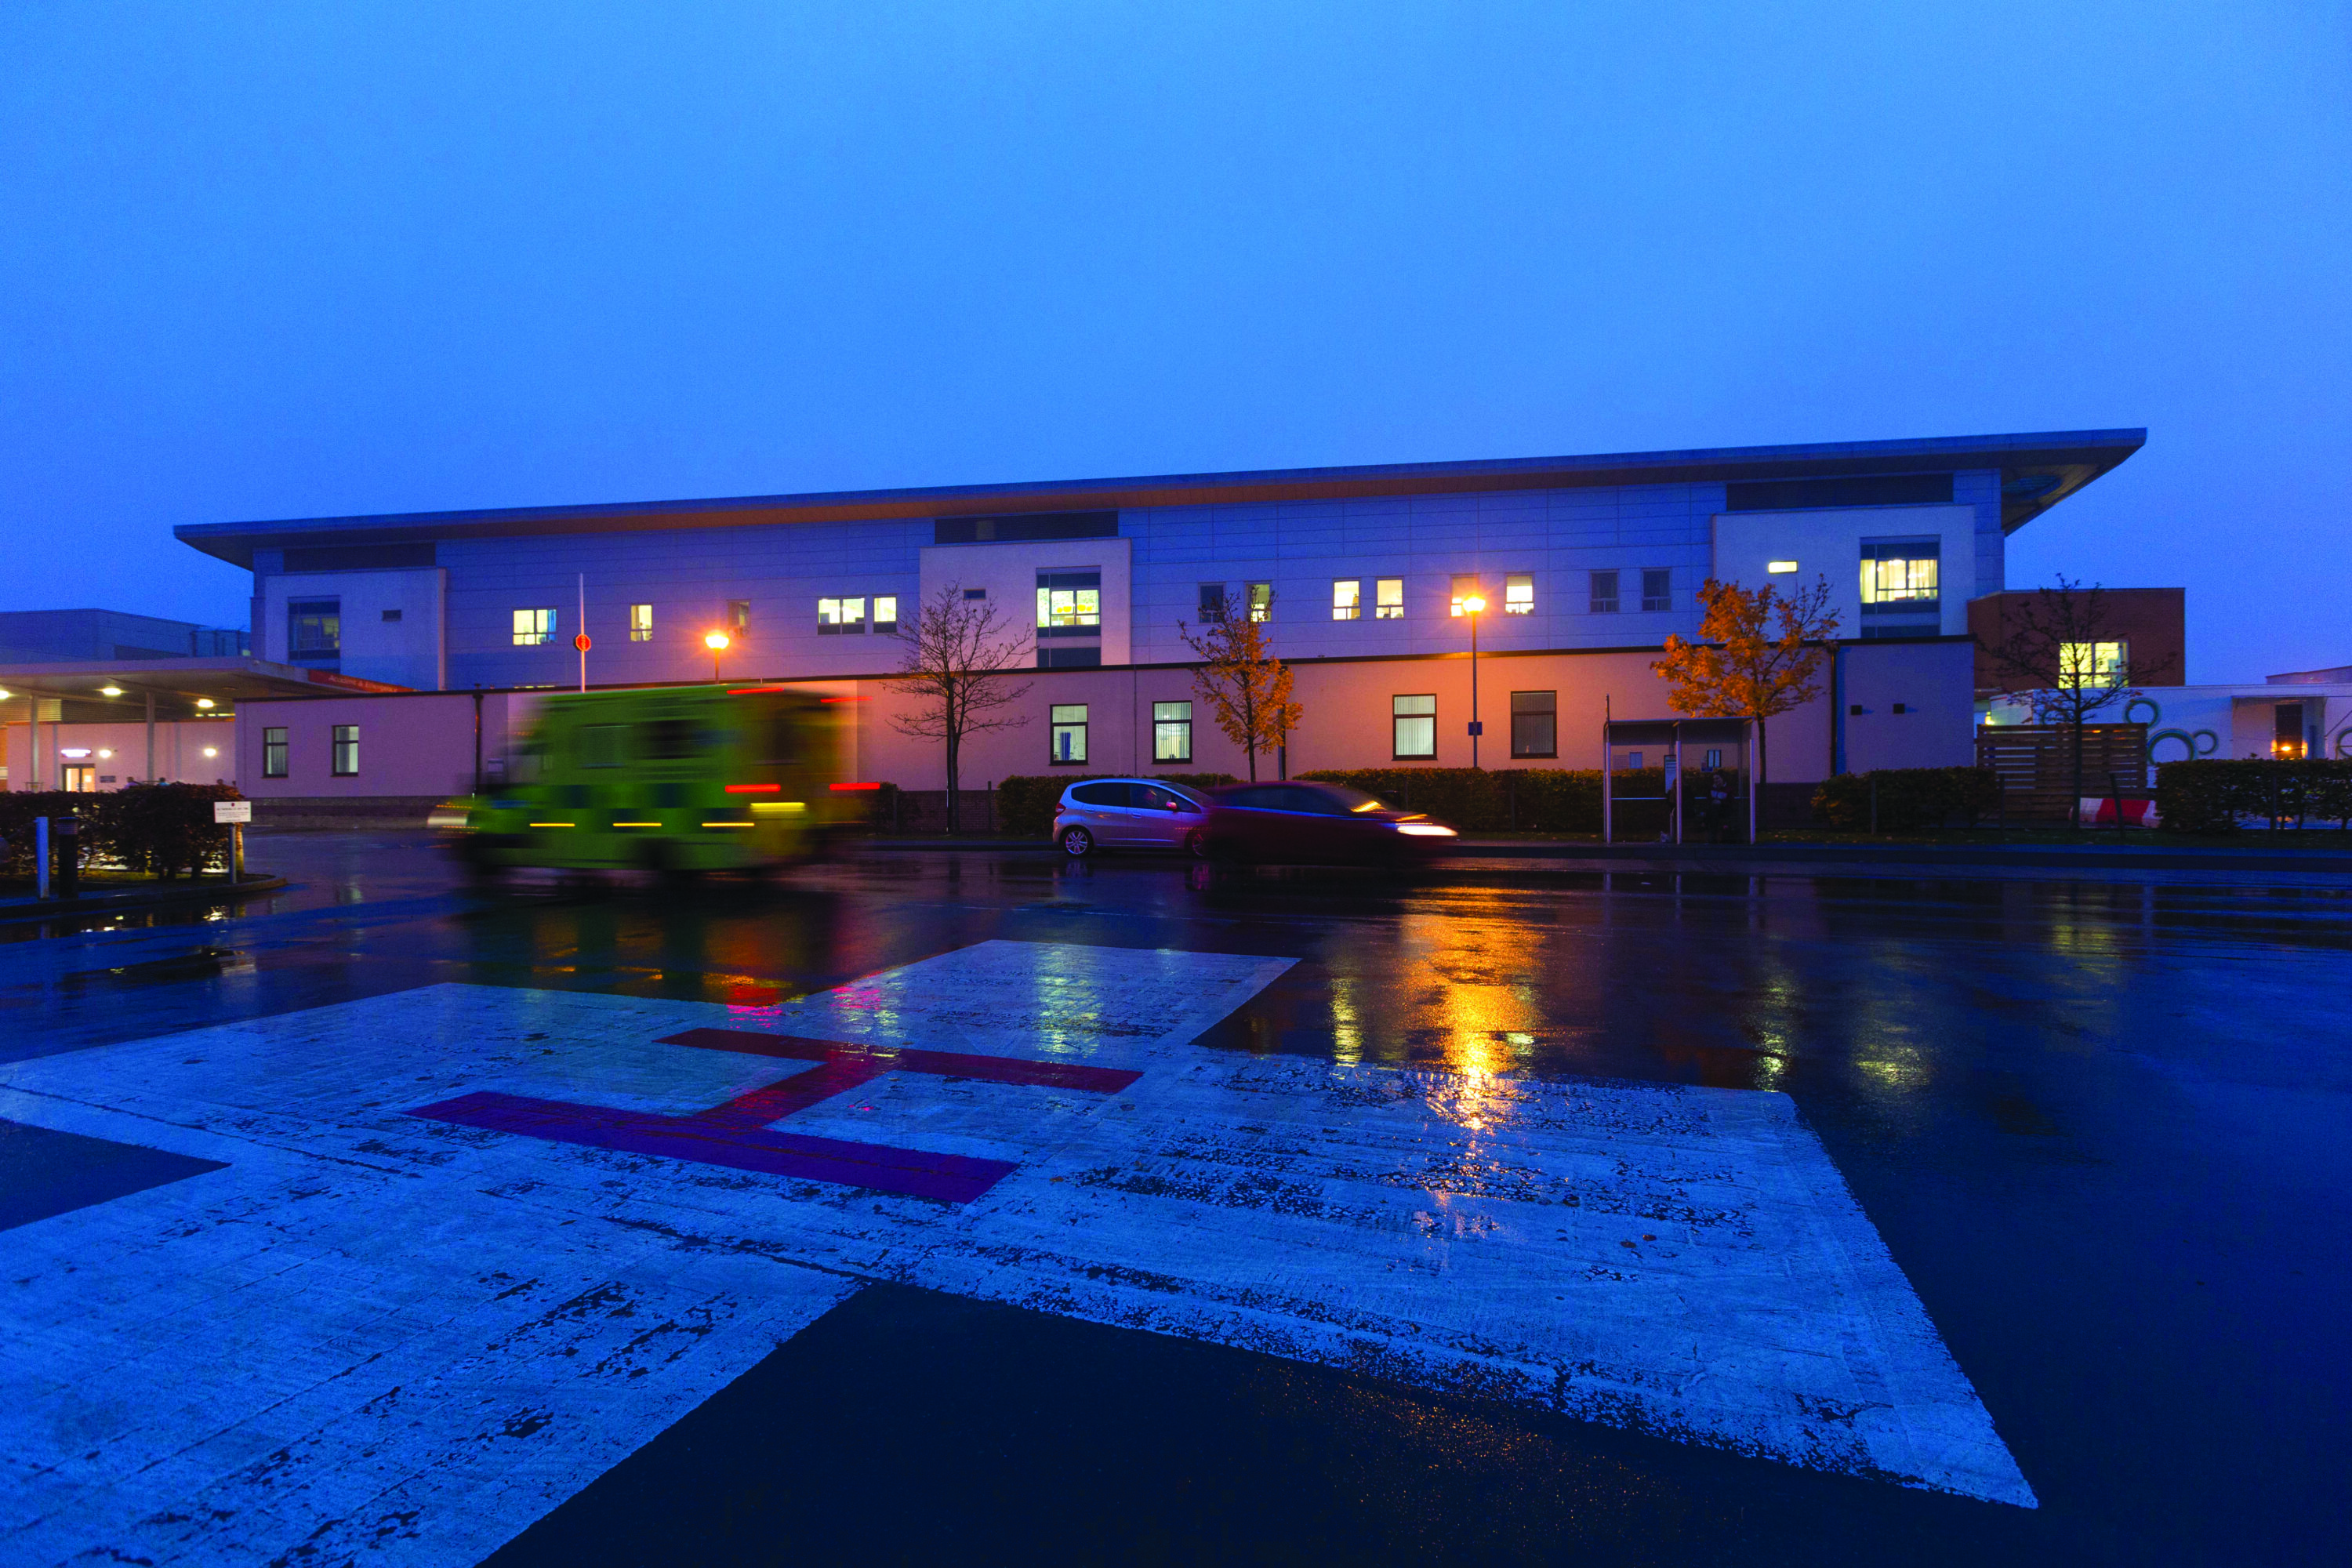 A picture of the Acute Medical Unit from outside. It is night time and the lights are on. There are cars in front of the building. In the foreground is a helicopter landing pad.